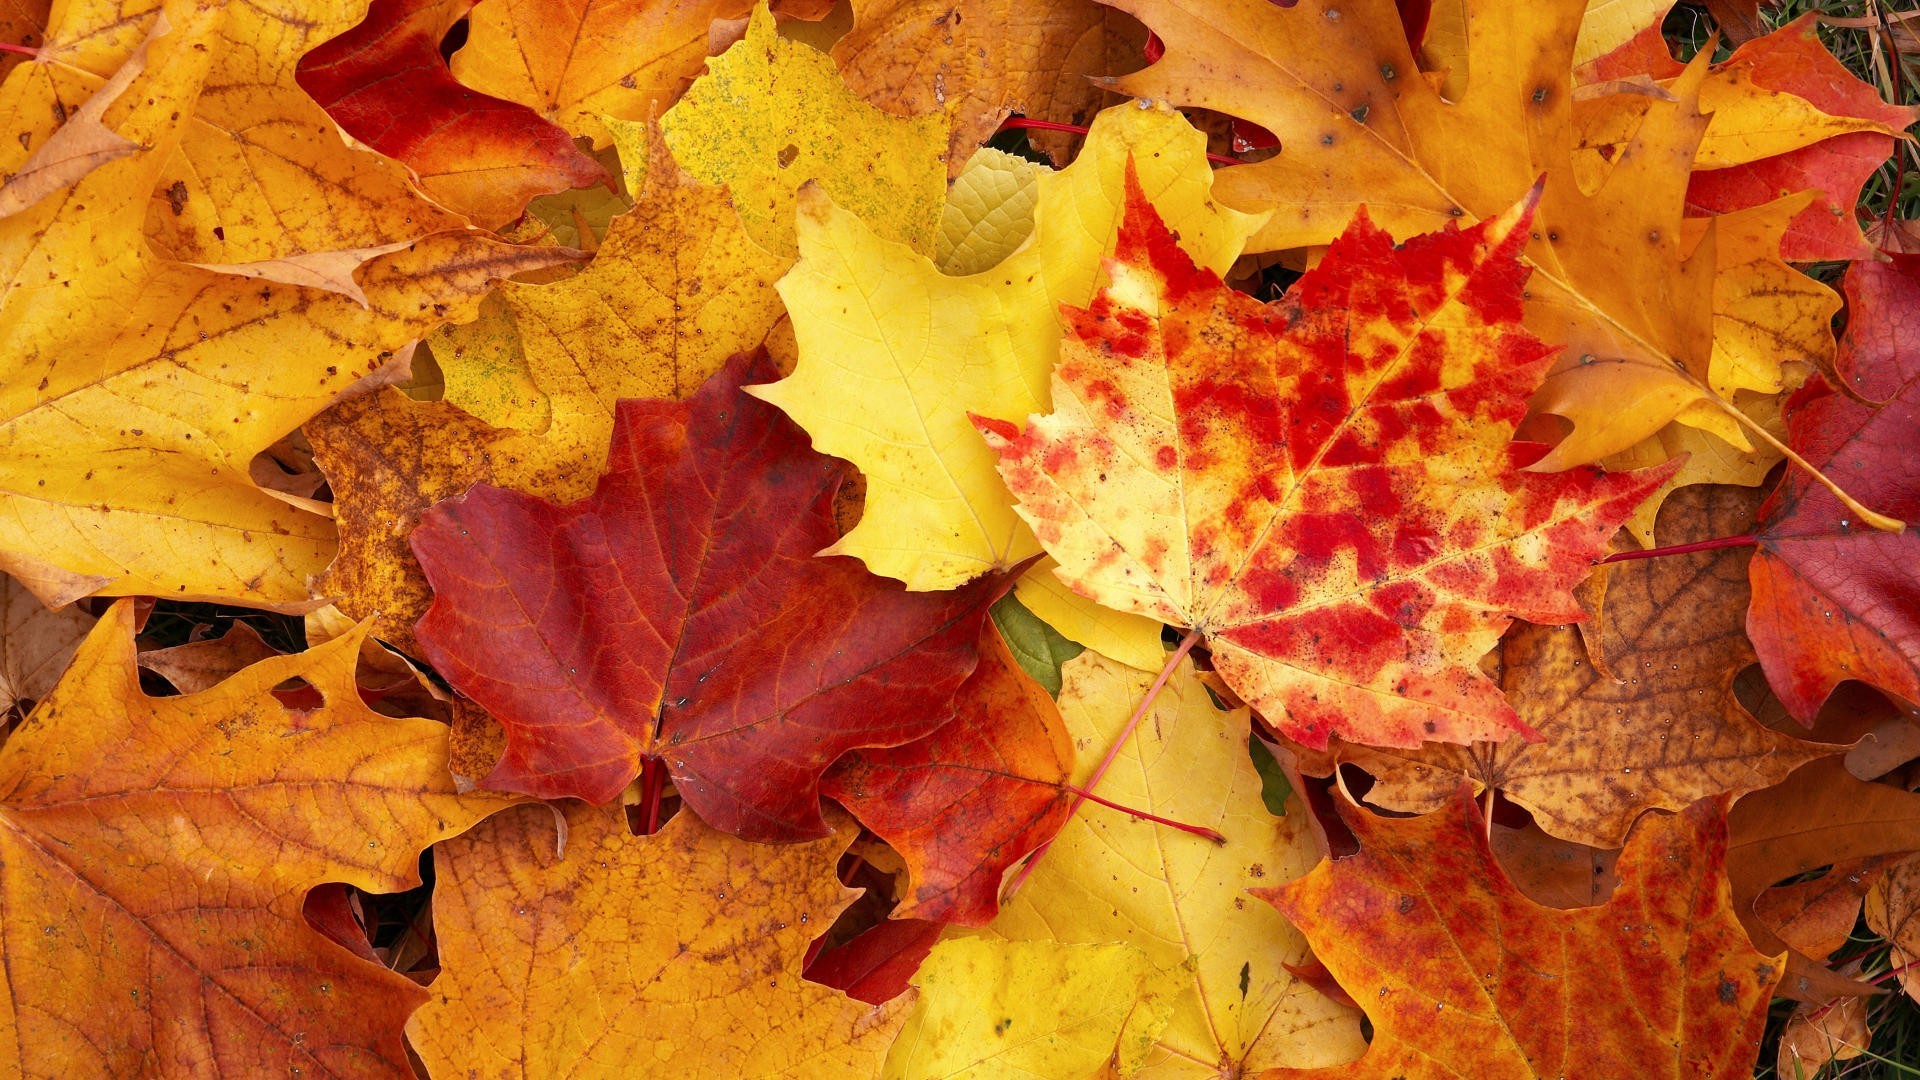 Leaves Yellow Autumn Wallpapers Hd Free Amazing Cool - Autumn 2017 - HD Wallpaper 